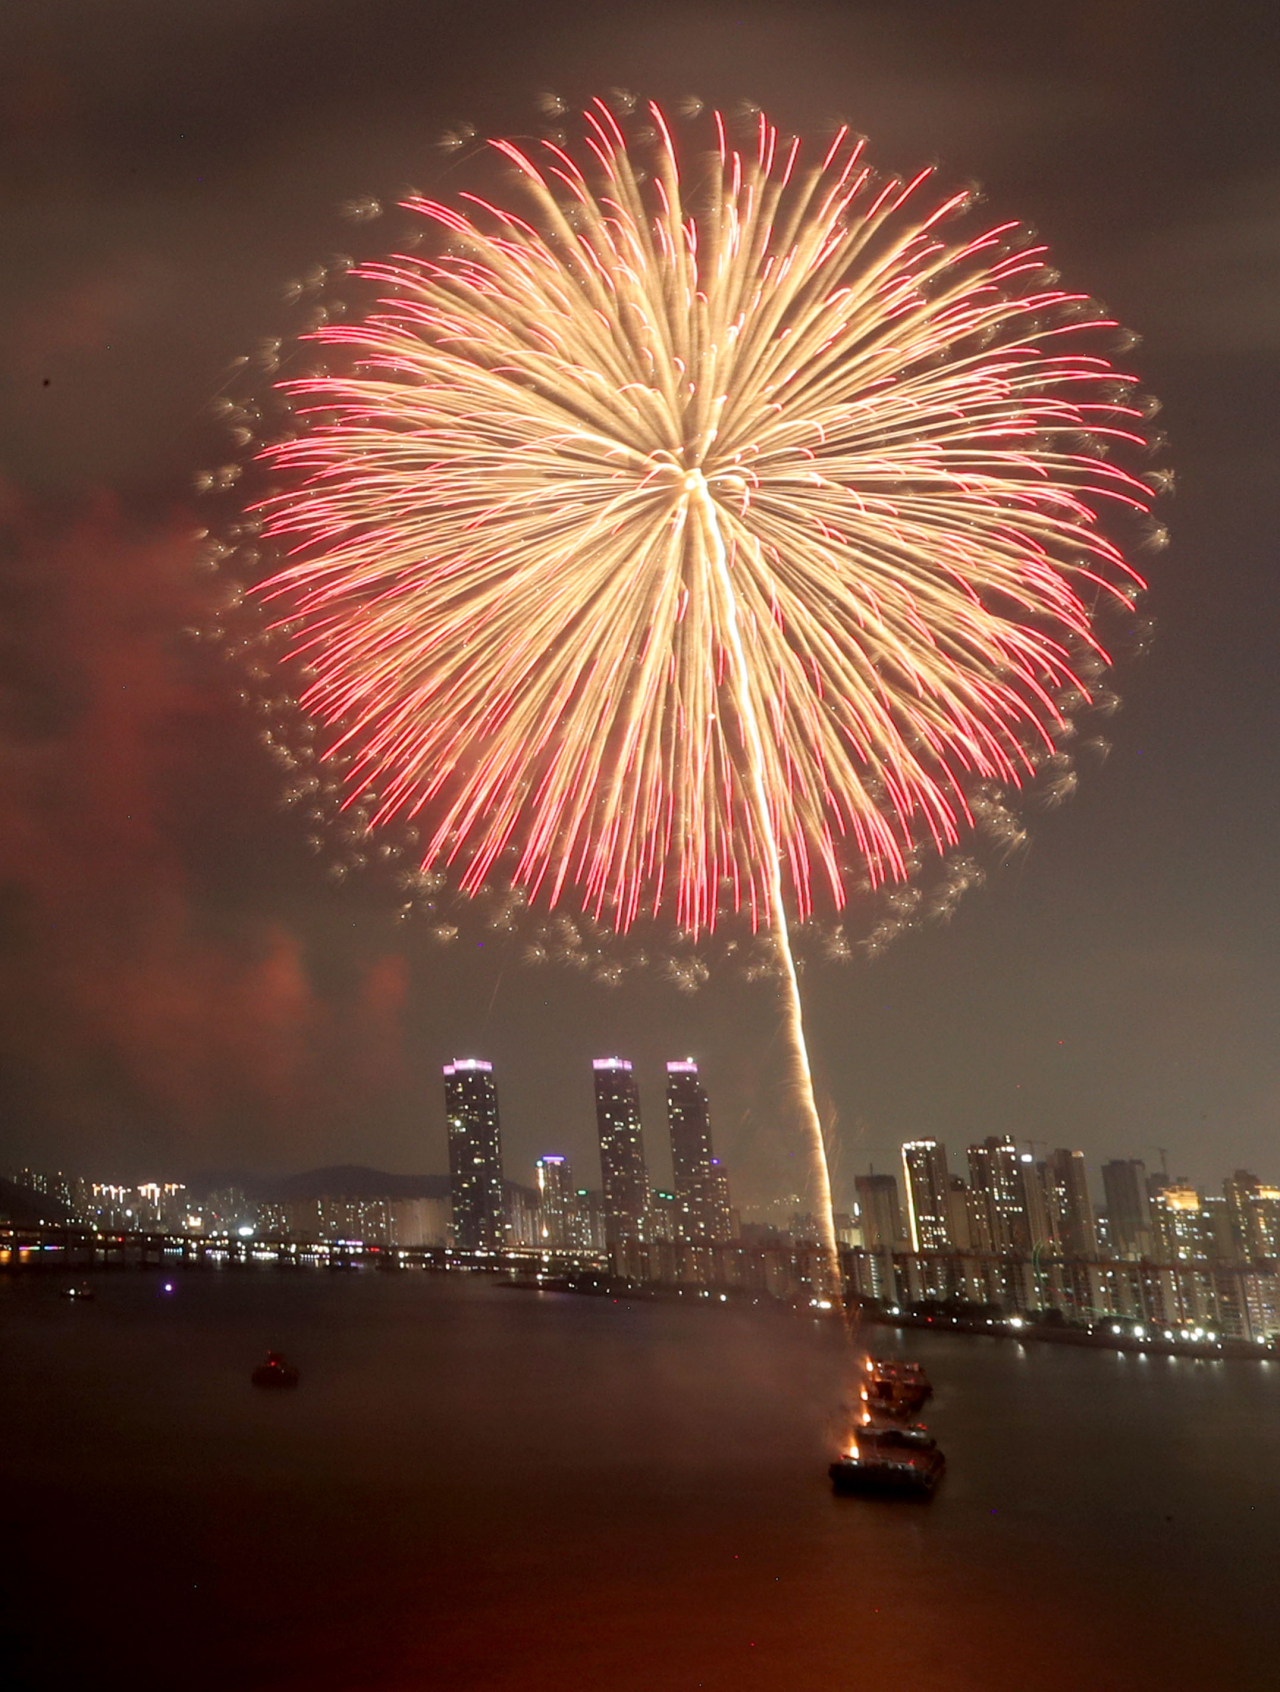 Big fireworks are seen during BIE delegation's visit to Busan on Thursday at Gwangalli Beach. (Yonhap)